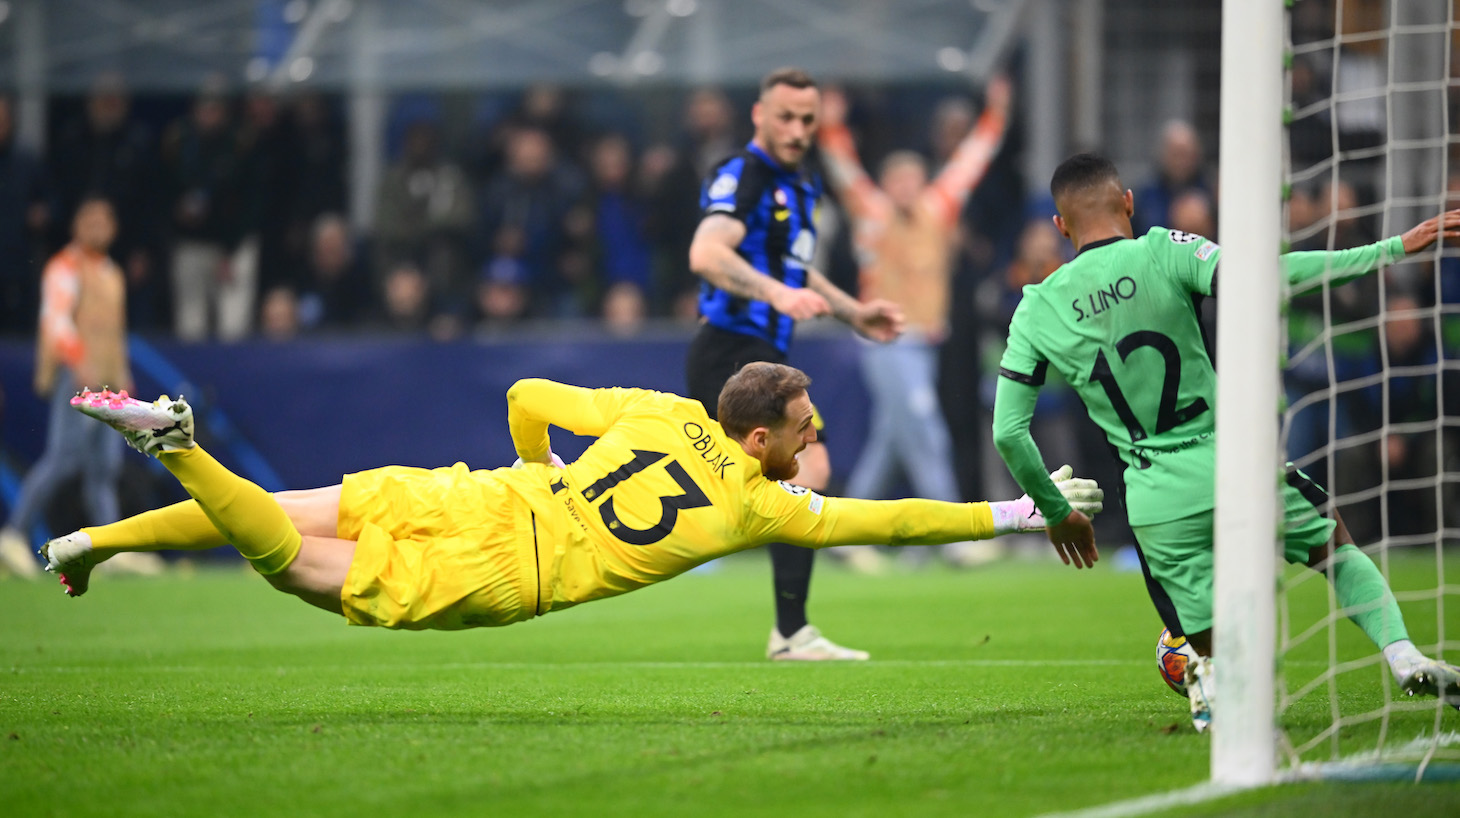 Marko Arnautovic of FC Internazionale scores the goal during the UEFA Champions League 2023/24 round of 16 first leg match between FC Internazionale and Atletico Madrid at Stadio Giuseppe Meazza on February 20, 2024 in Milan, Italy.